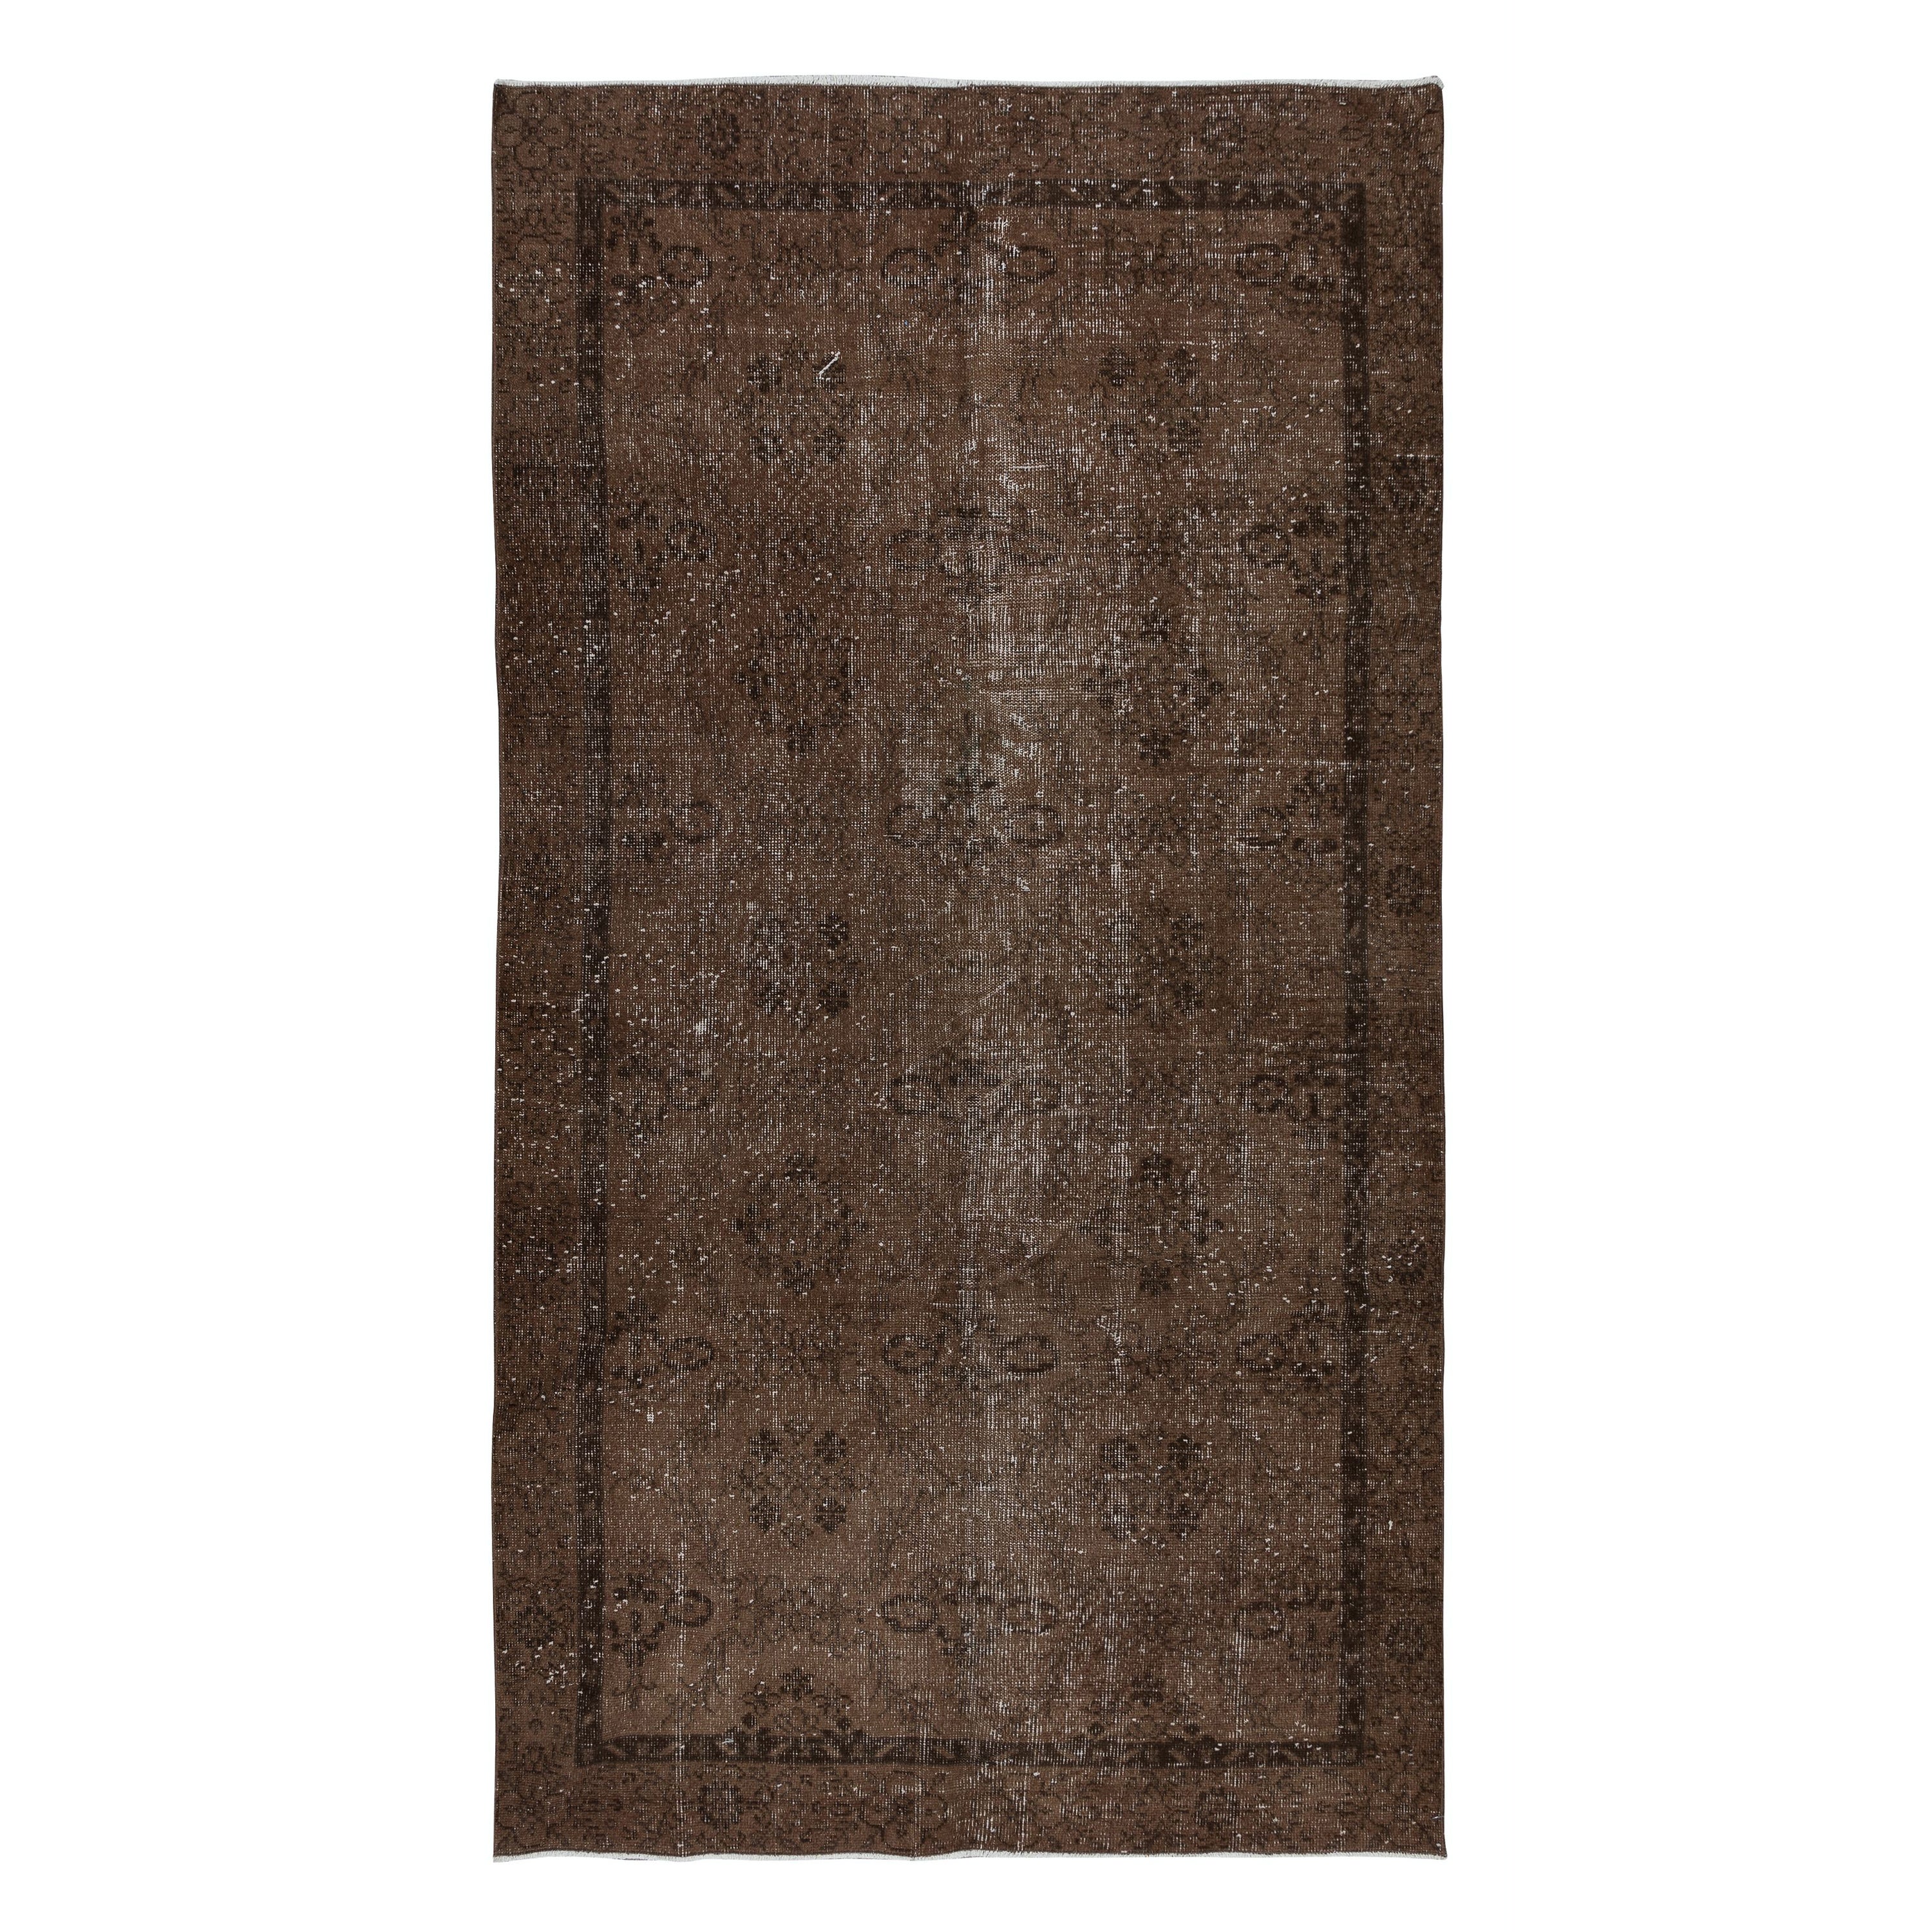 4.8x9.2 Ft Brown Handmade Wool & Cotton Rug, Contemporary Turkish Carpet For Sale